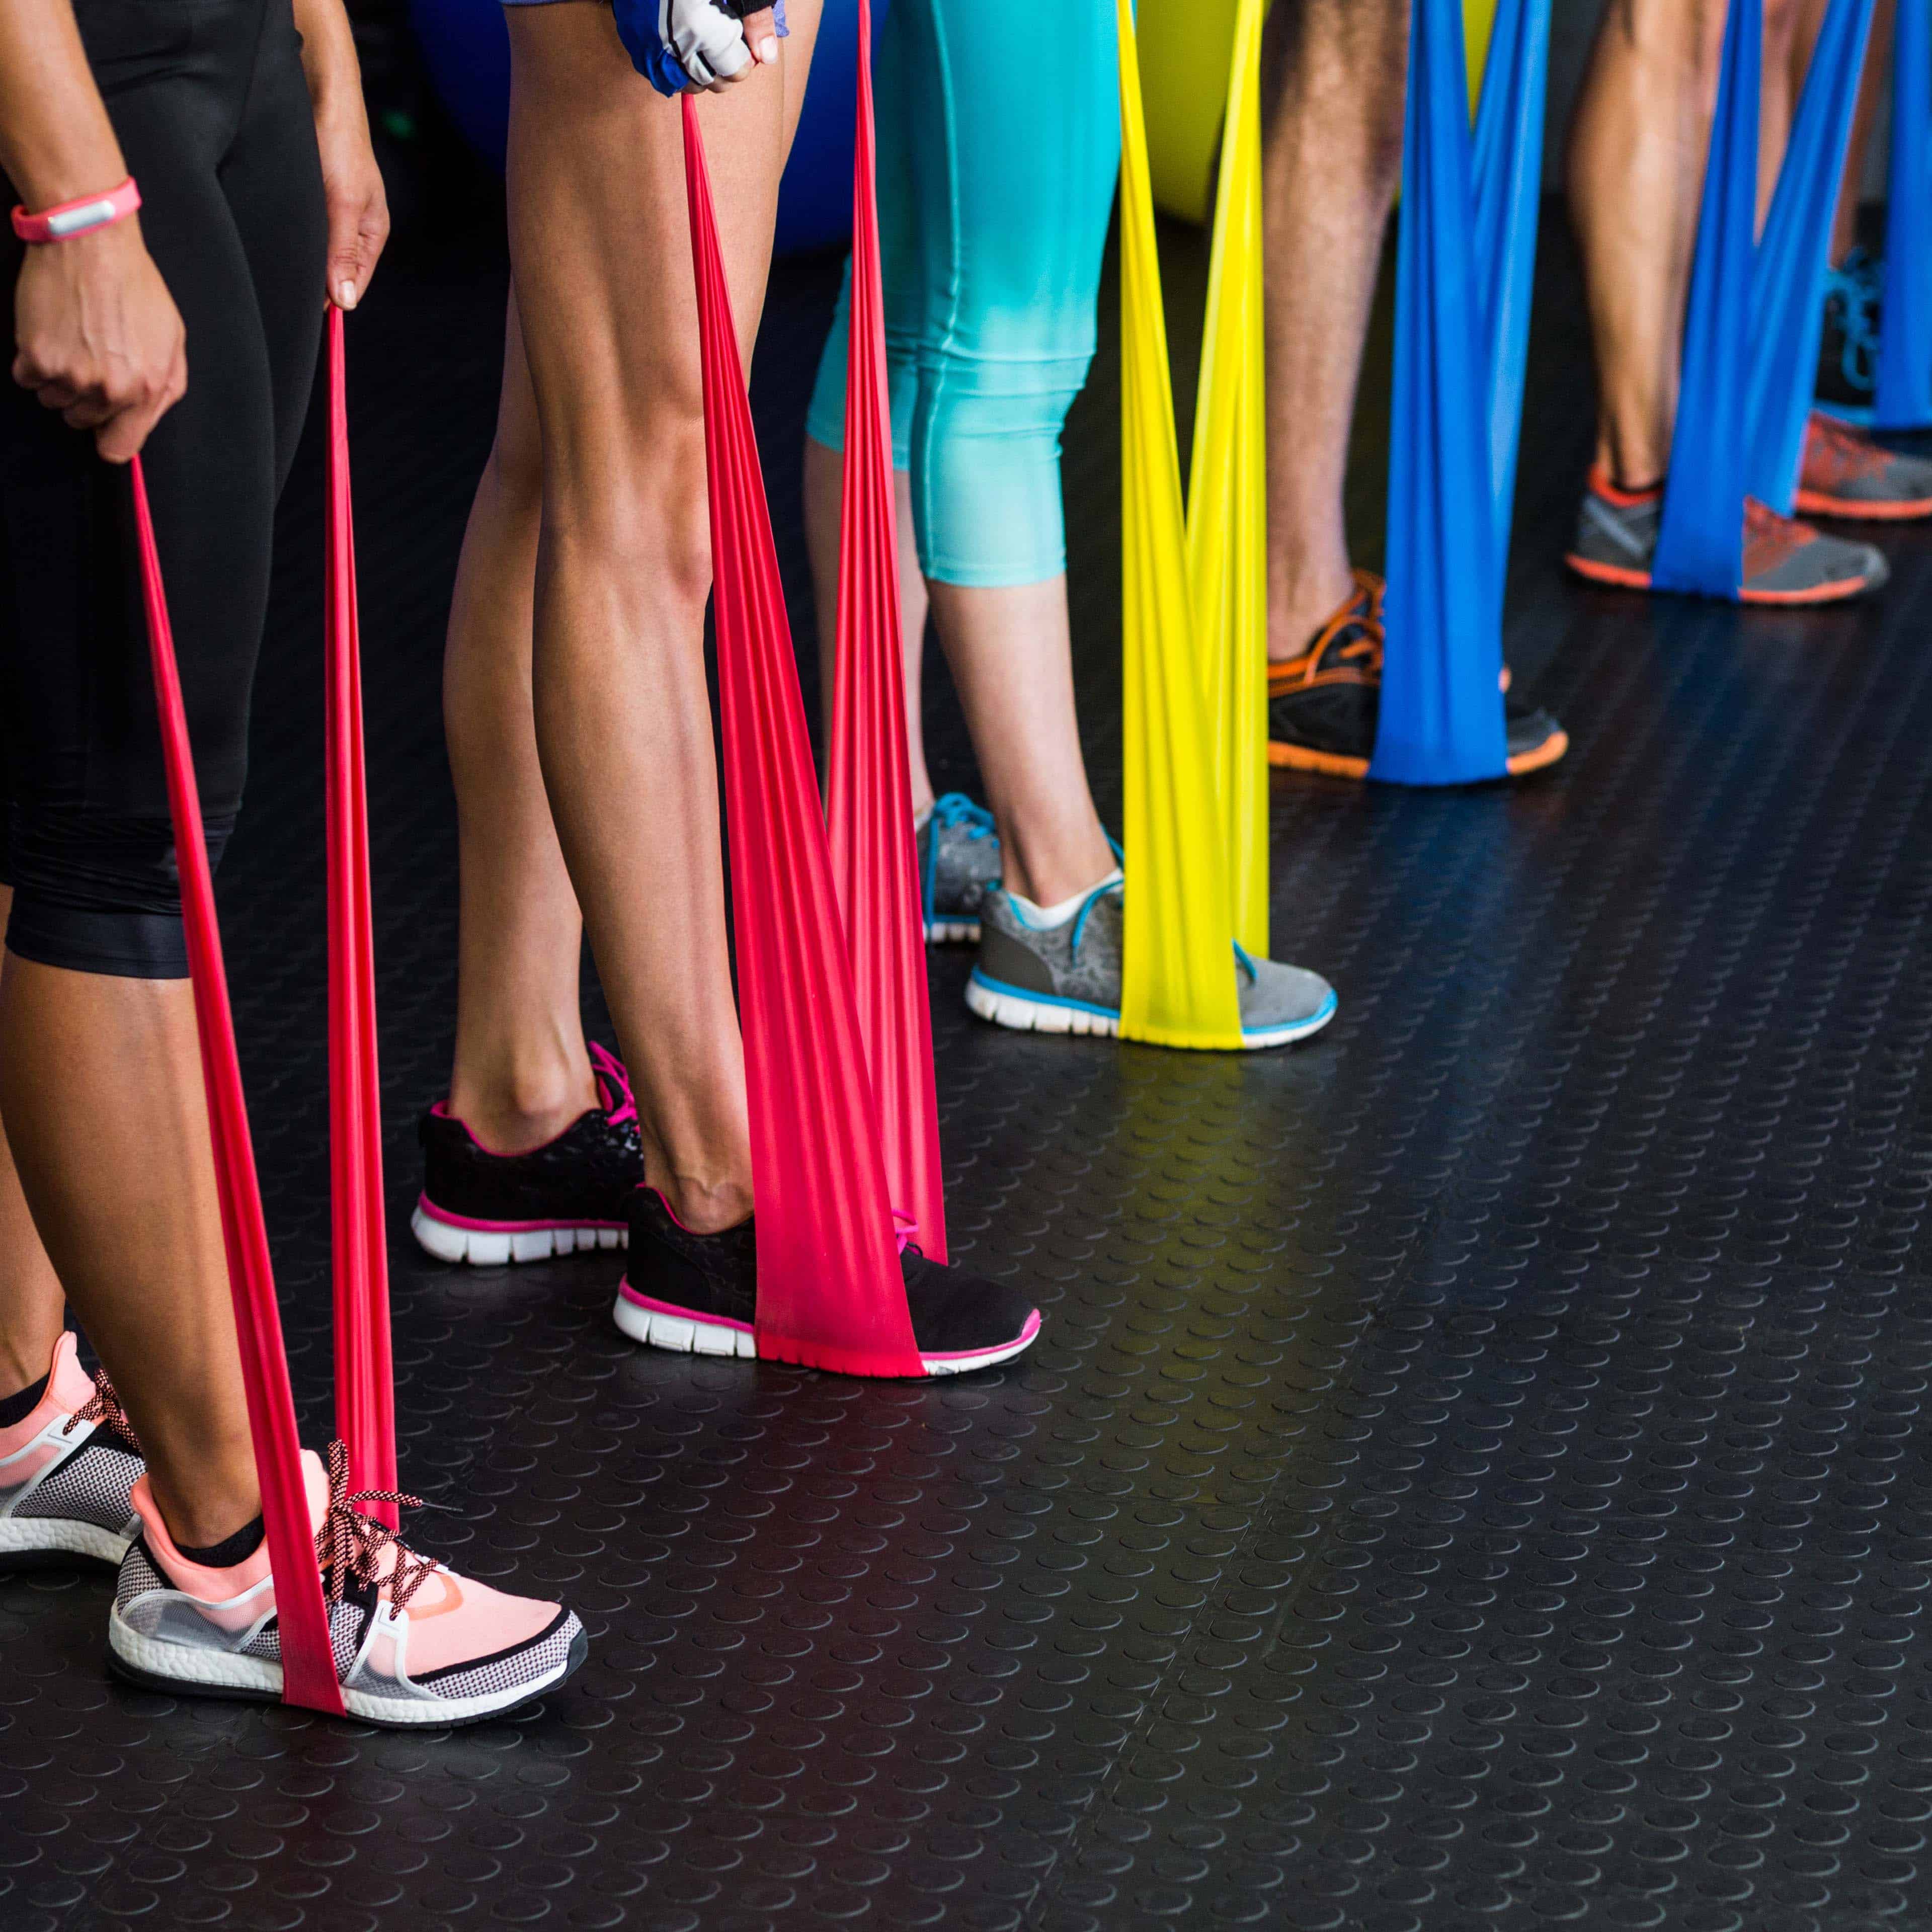 Resistance band workout. Set of 5 Professional Non-Latex exercise